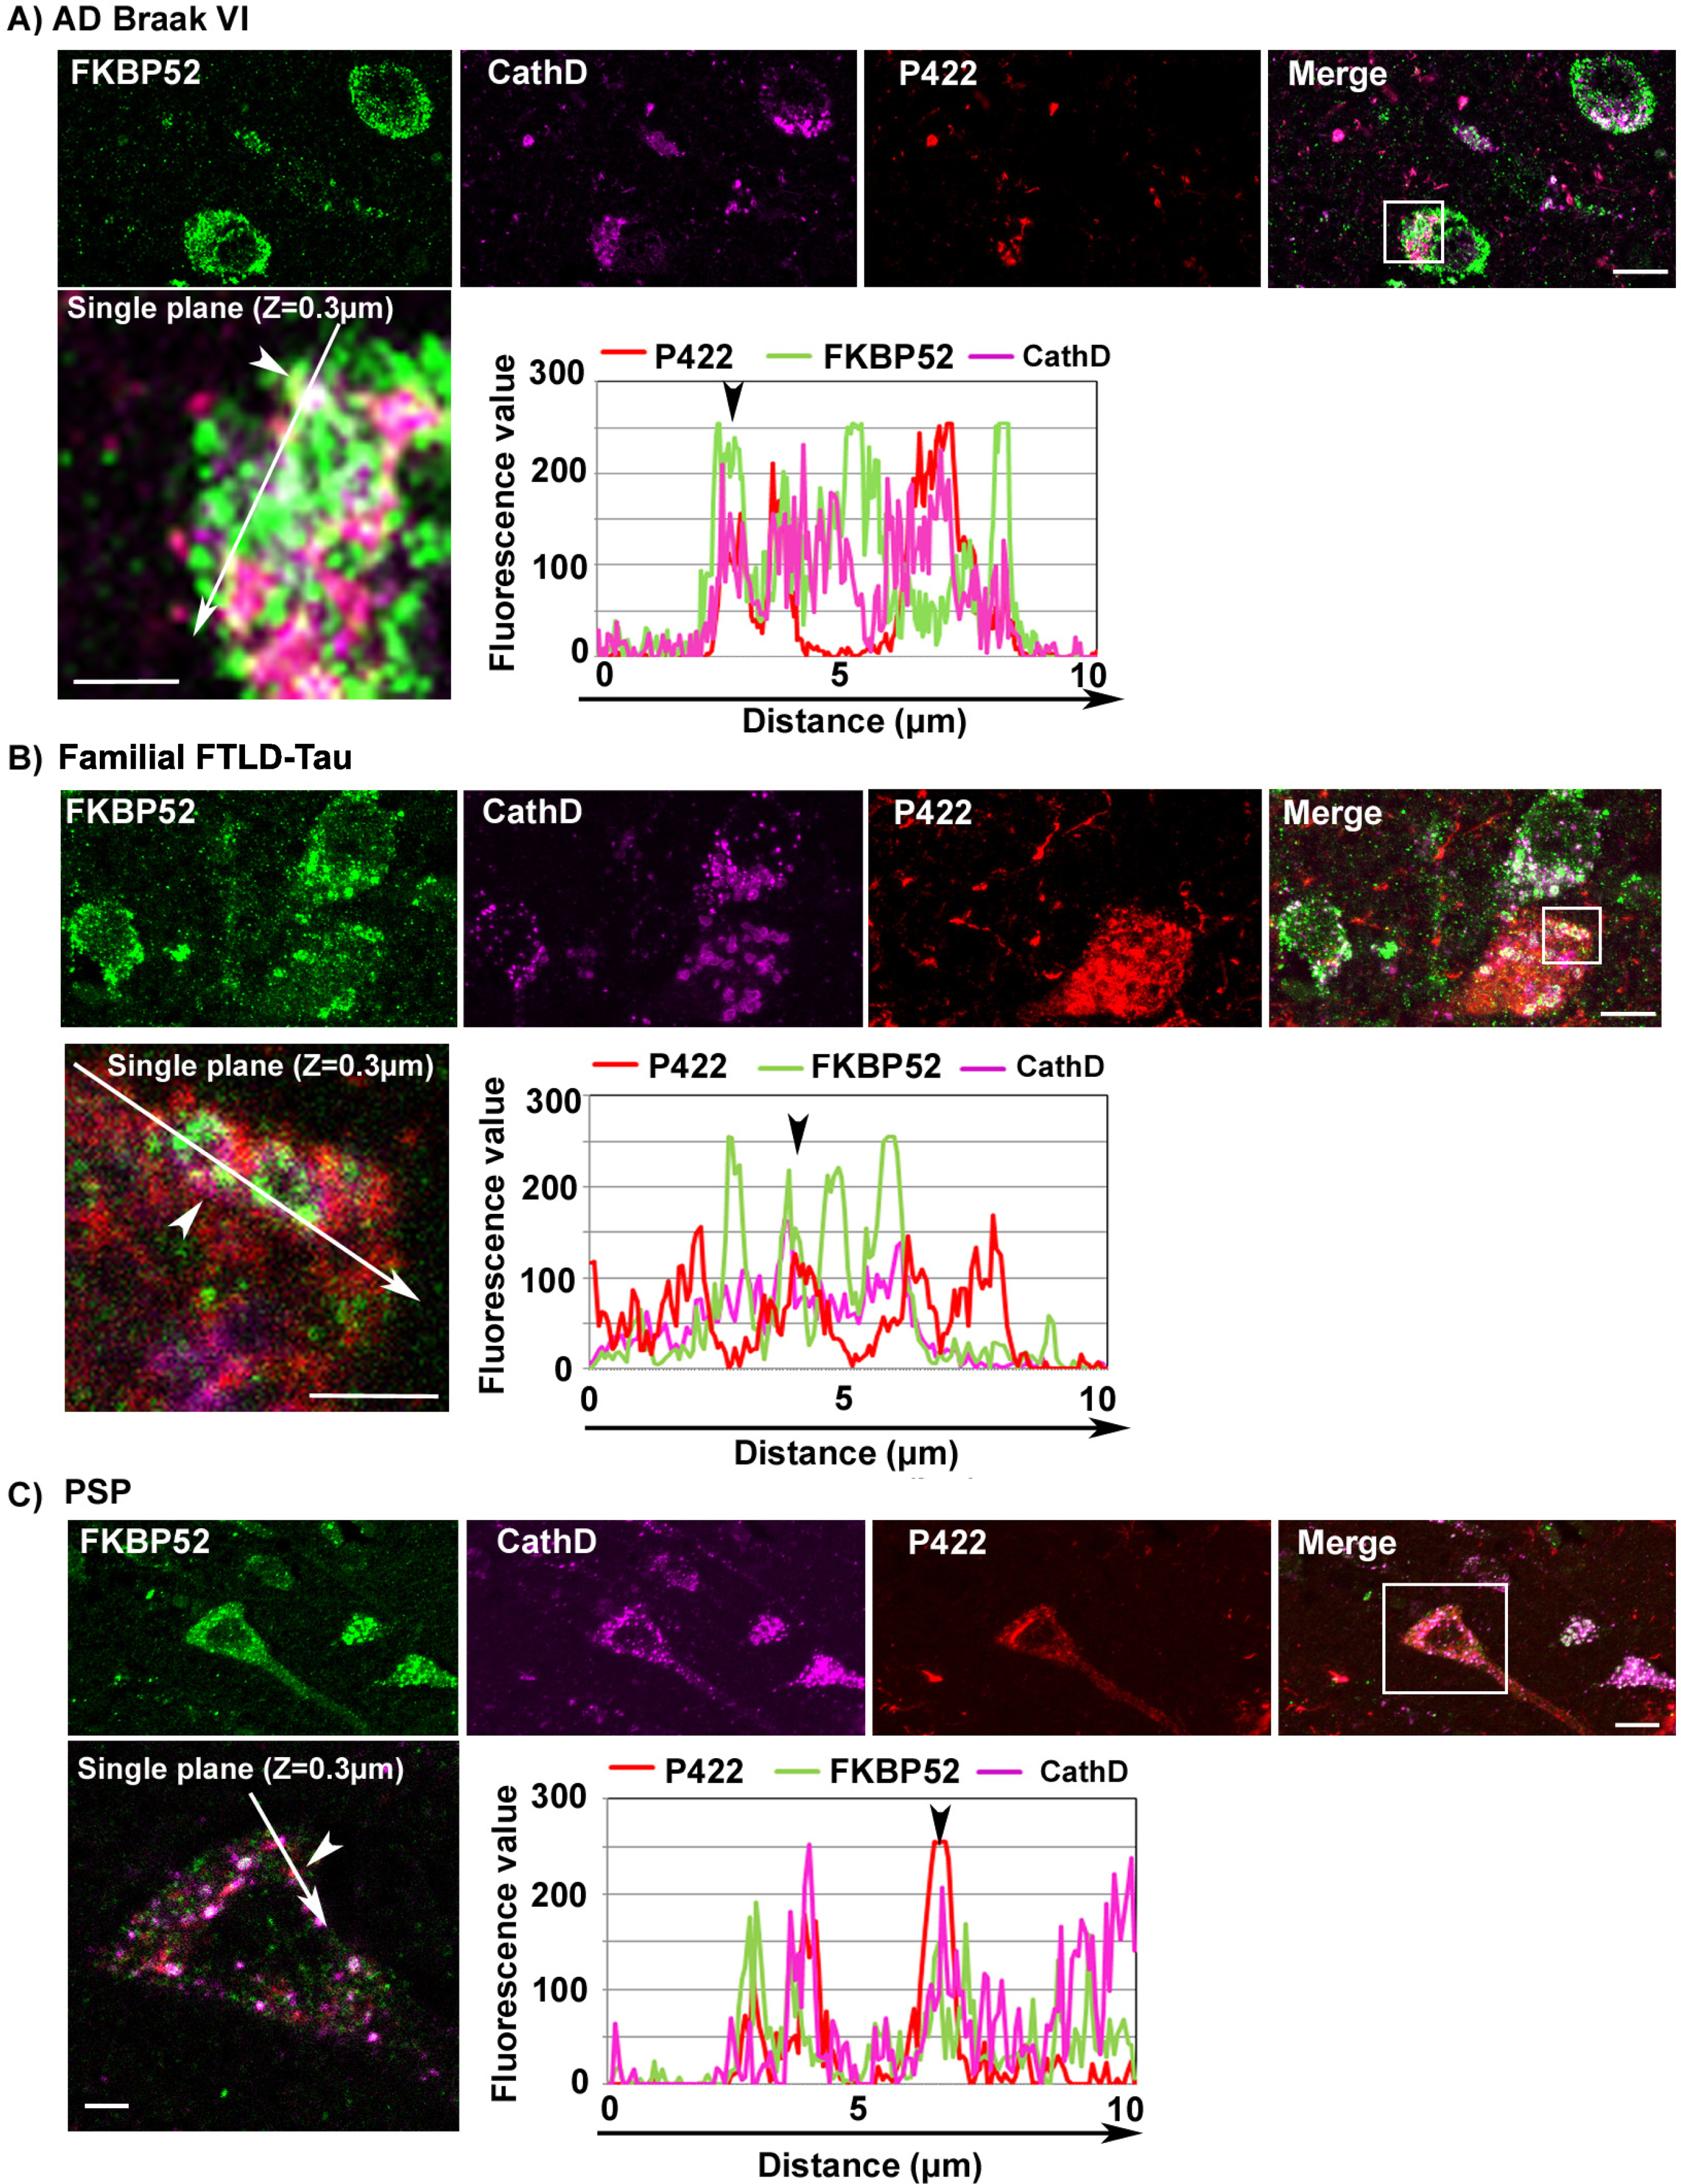 Triple labeling experiments showing the lysosomal colocalization of FKBP52 and the early pathologic Tau-pS422 isoform in frontal cortex neurons of patients with different tauopathies. Triple labeling experiments of familial FTLD-Tau (A), AD Braak VI (B), and PSP (C) frontal cortex sections respectively: FKBP52 (green) and Tau-pS422 (red) colocalize (merge) with the endolysosomal marker Cathepsin D in the three tauopathies. Scale bar 10μm. At the lower right of each set of micrographs: superposition of the three respective single plane fluorescence profiles of a single neuron (lower left, scale bar 3μm).